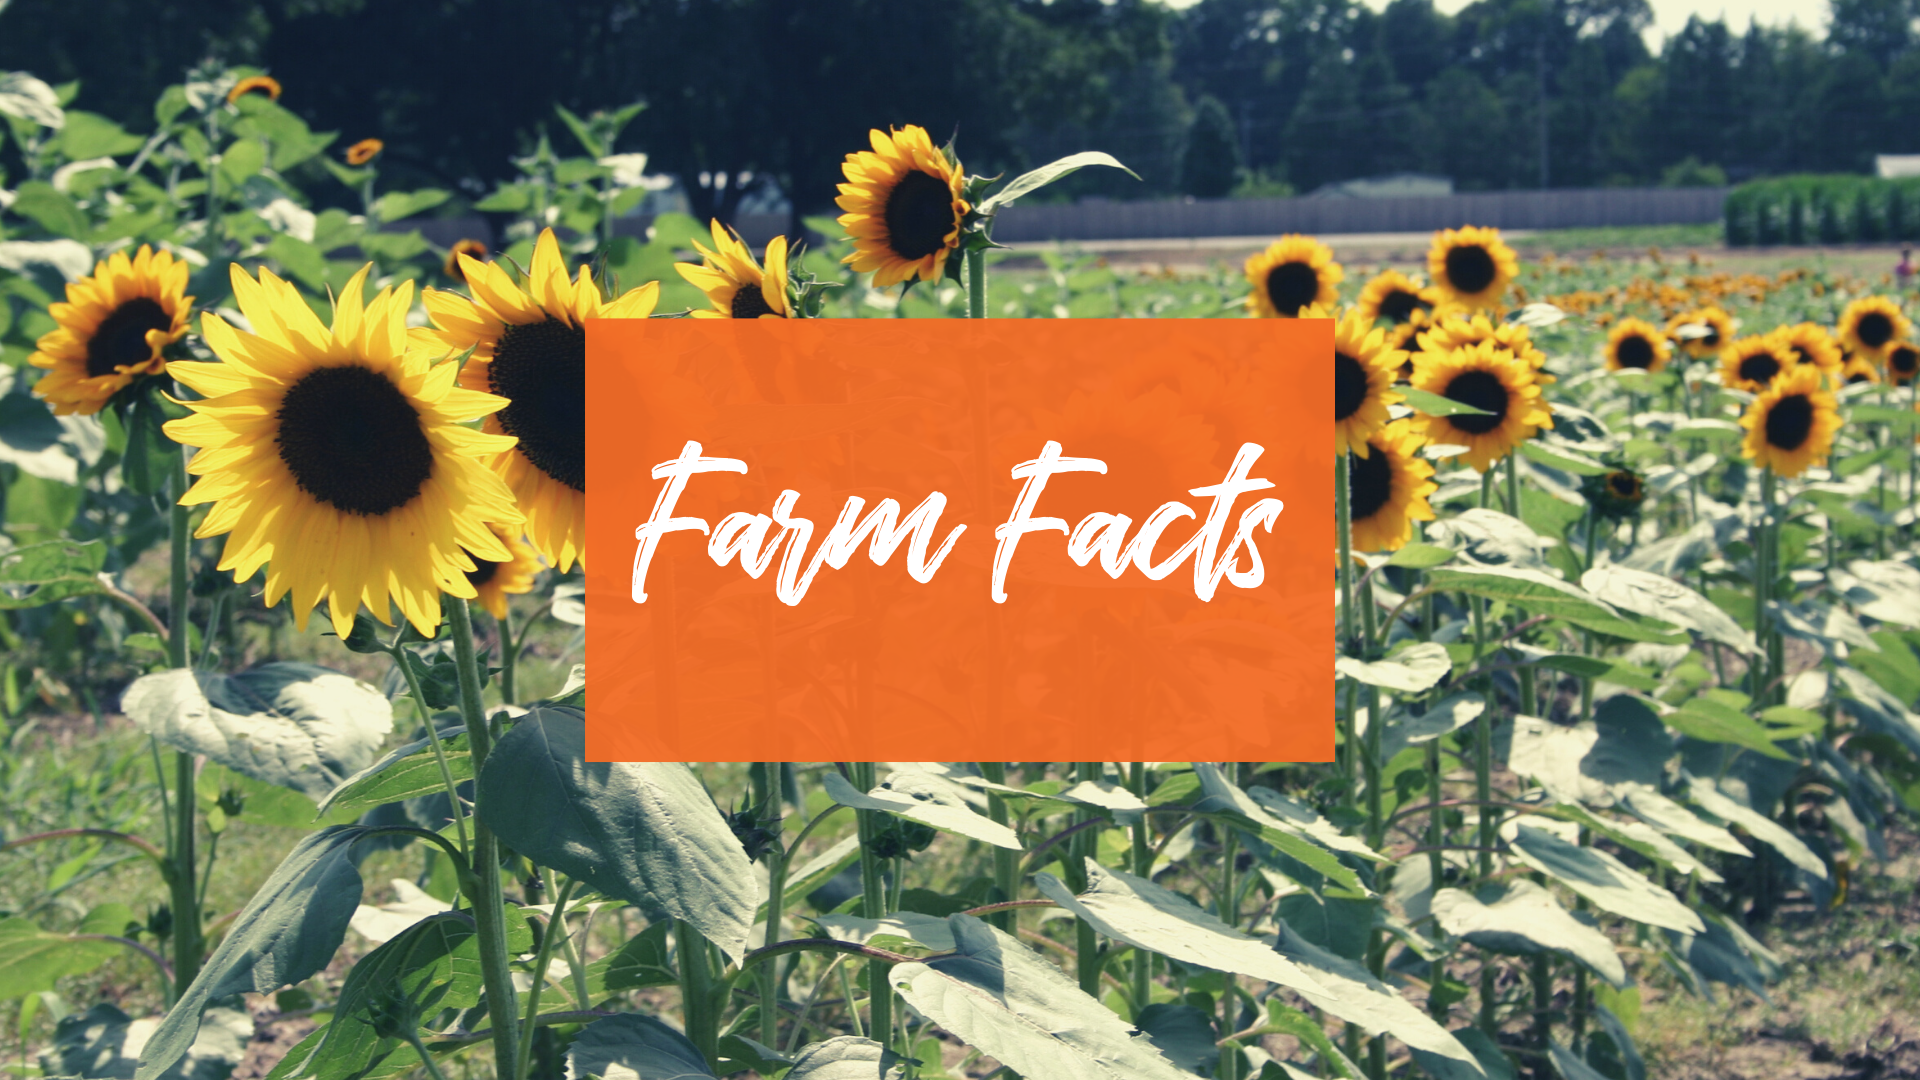 Farm facts about agriculture in Johnston County, NC.